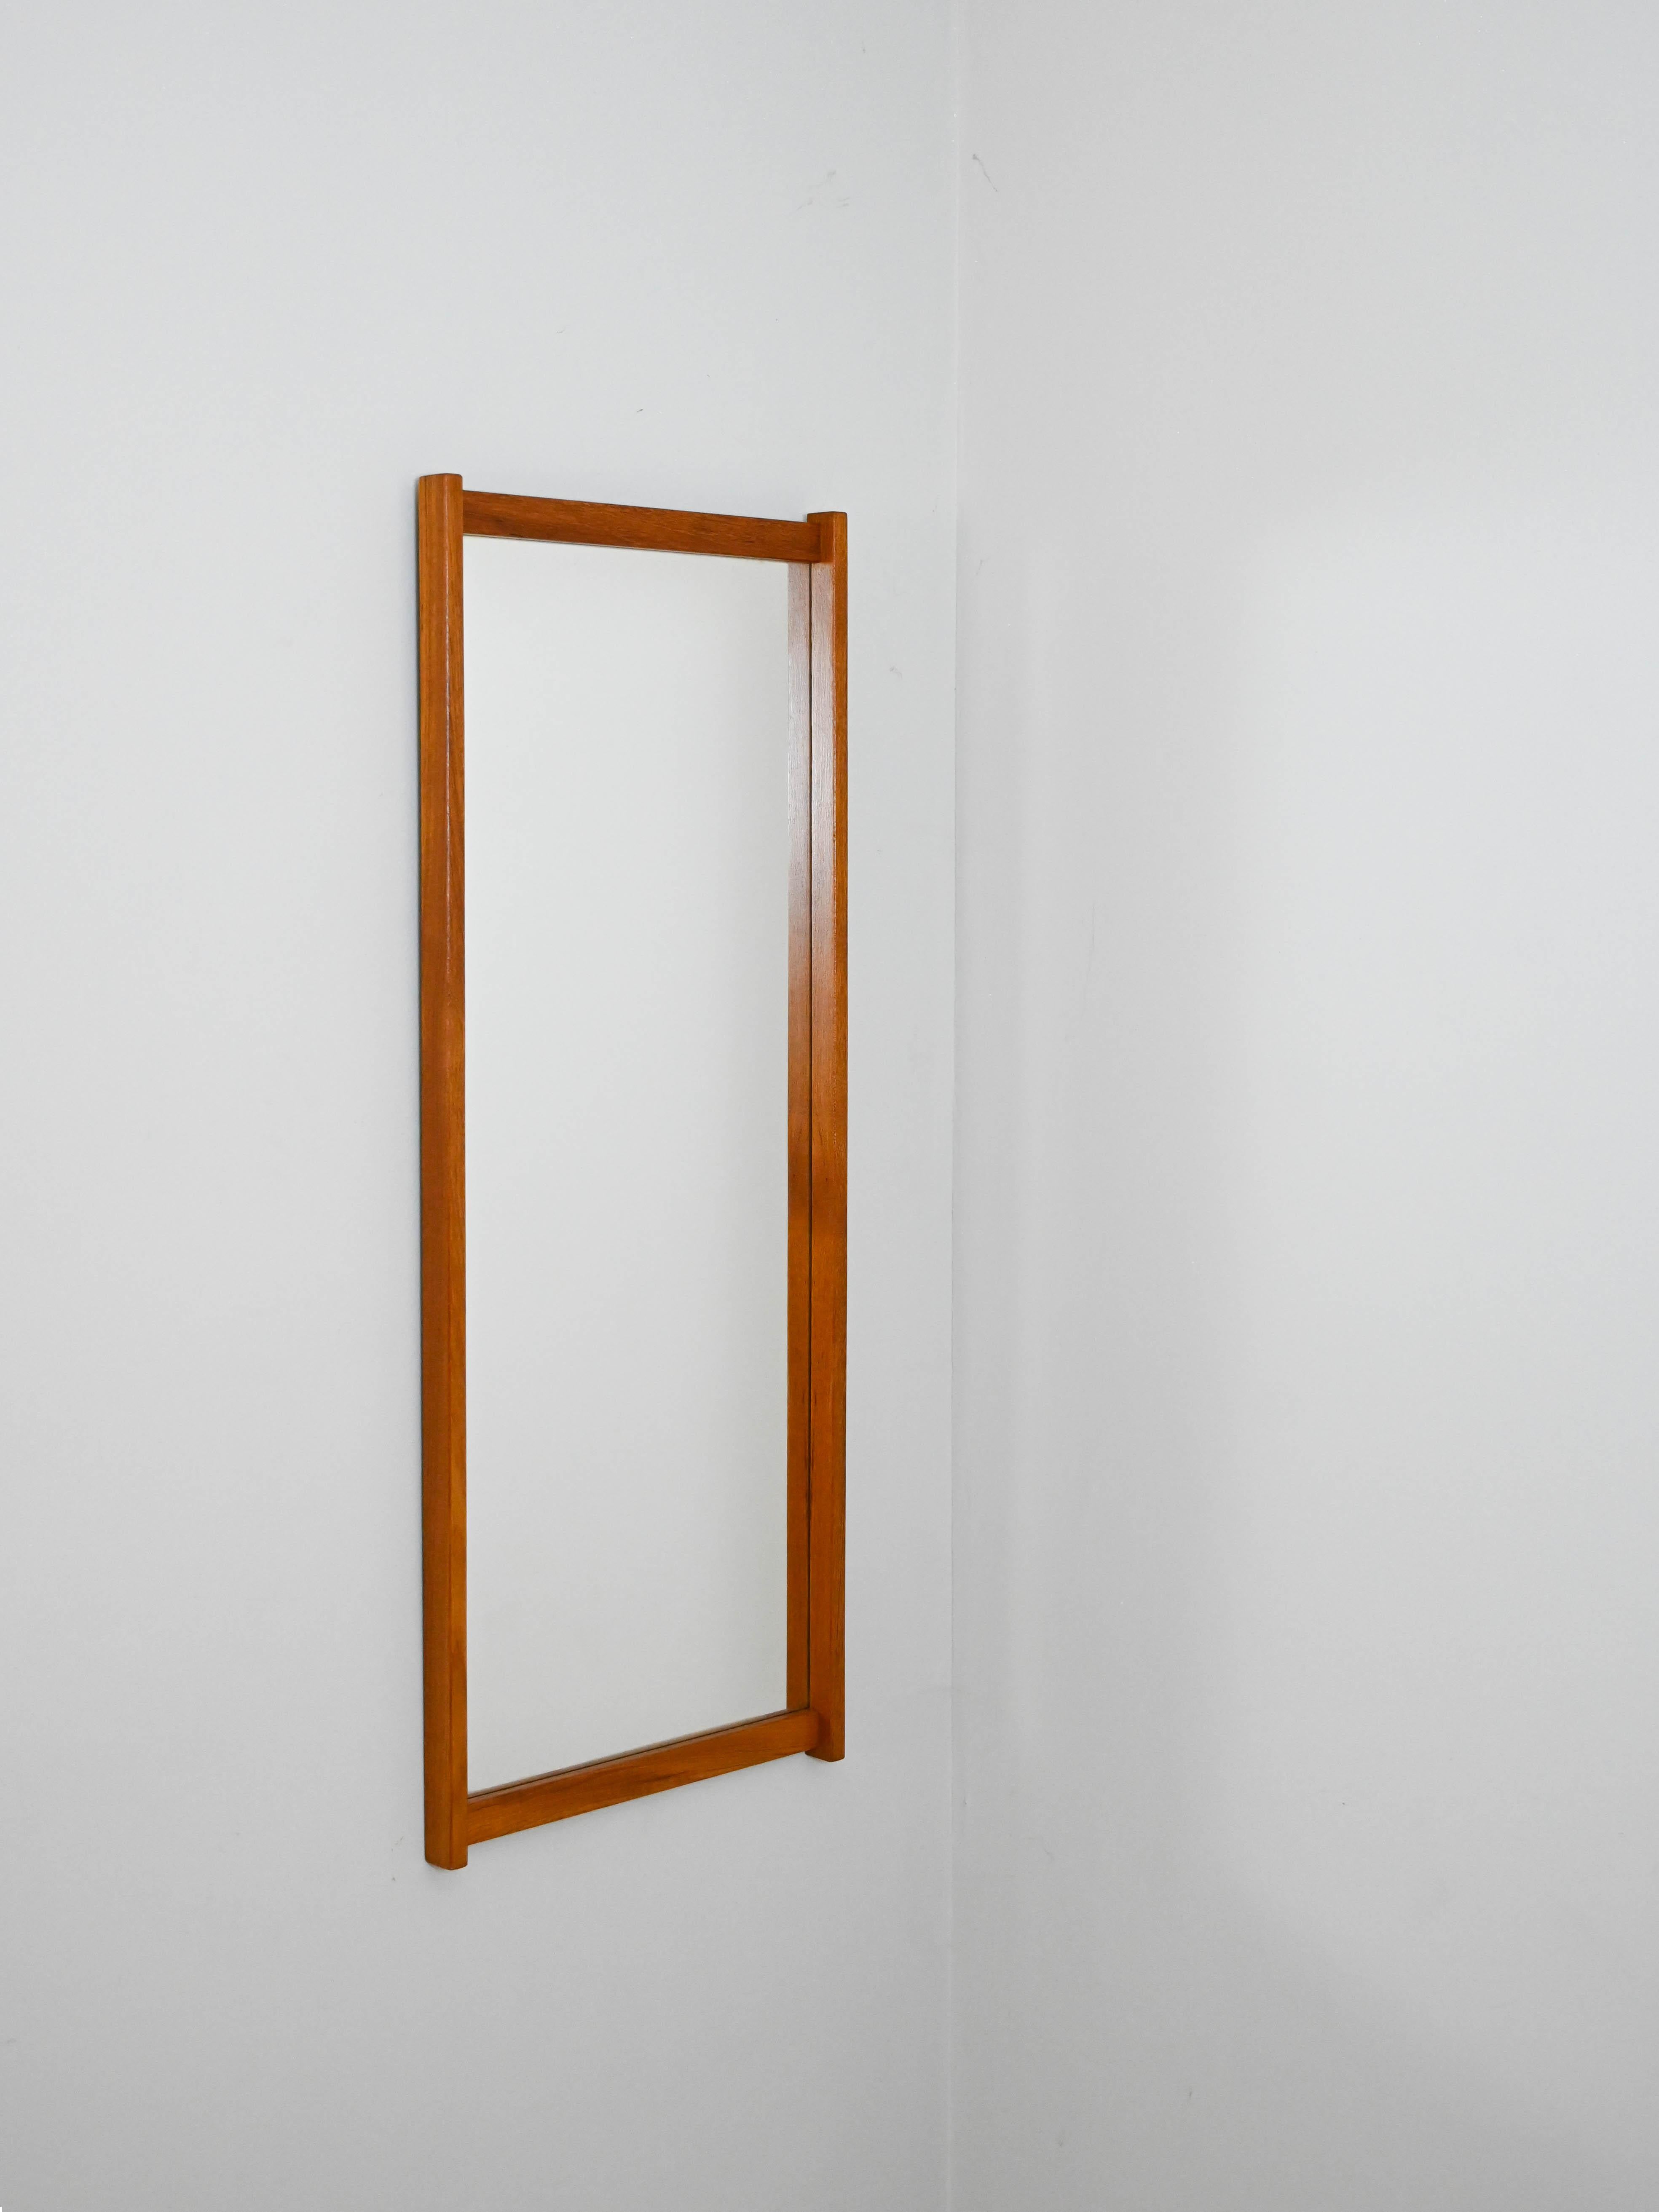 1960s mirror with a teak frame.

An elegant modern antique piece with a typical mid-century taste. It features a teak frame whose long sides are more prominent than the short ones, giving it an original look.
The minimal and timeless lines make